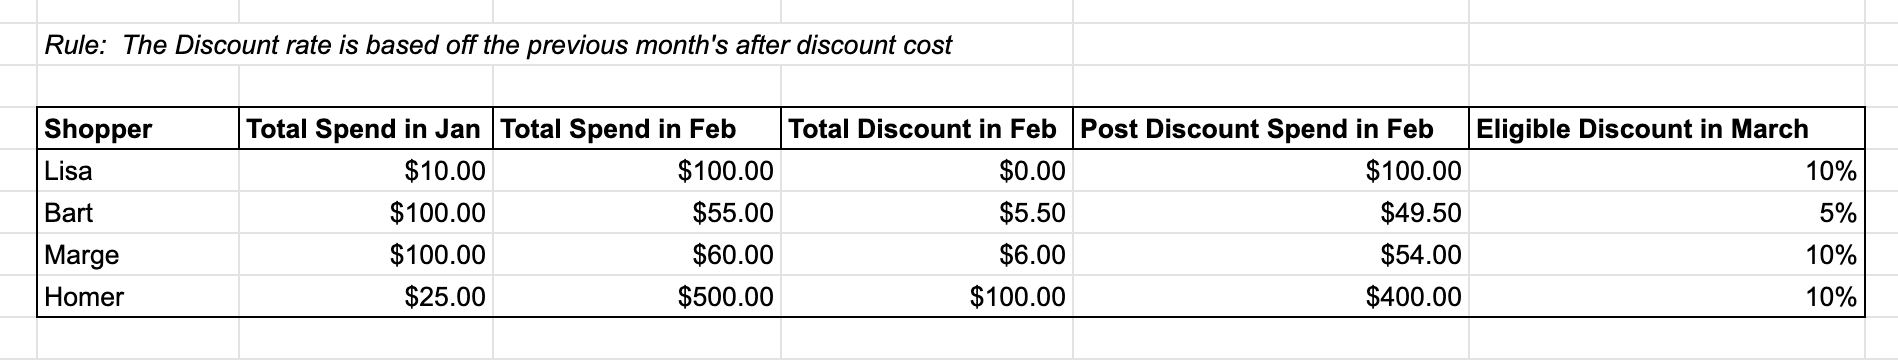 Table showing the dollar values of spends and savings per month